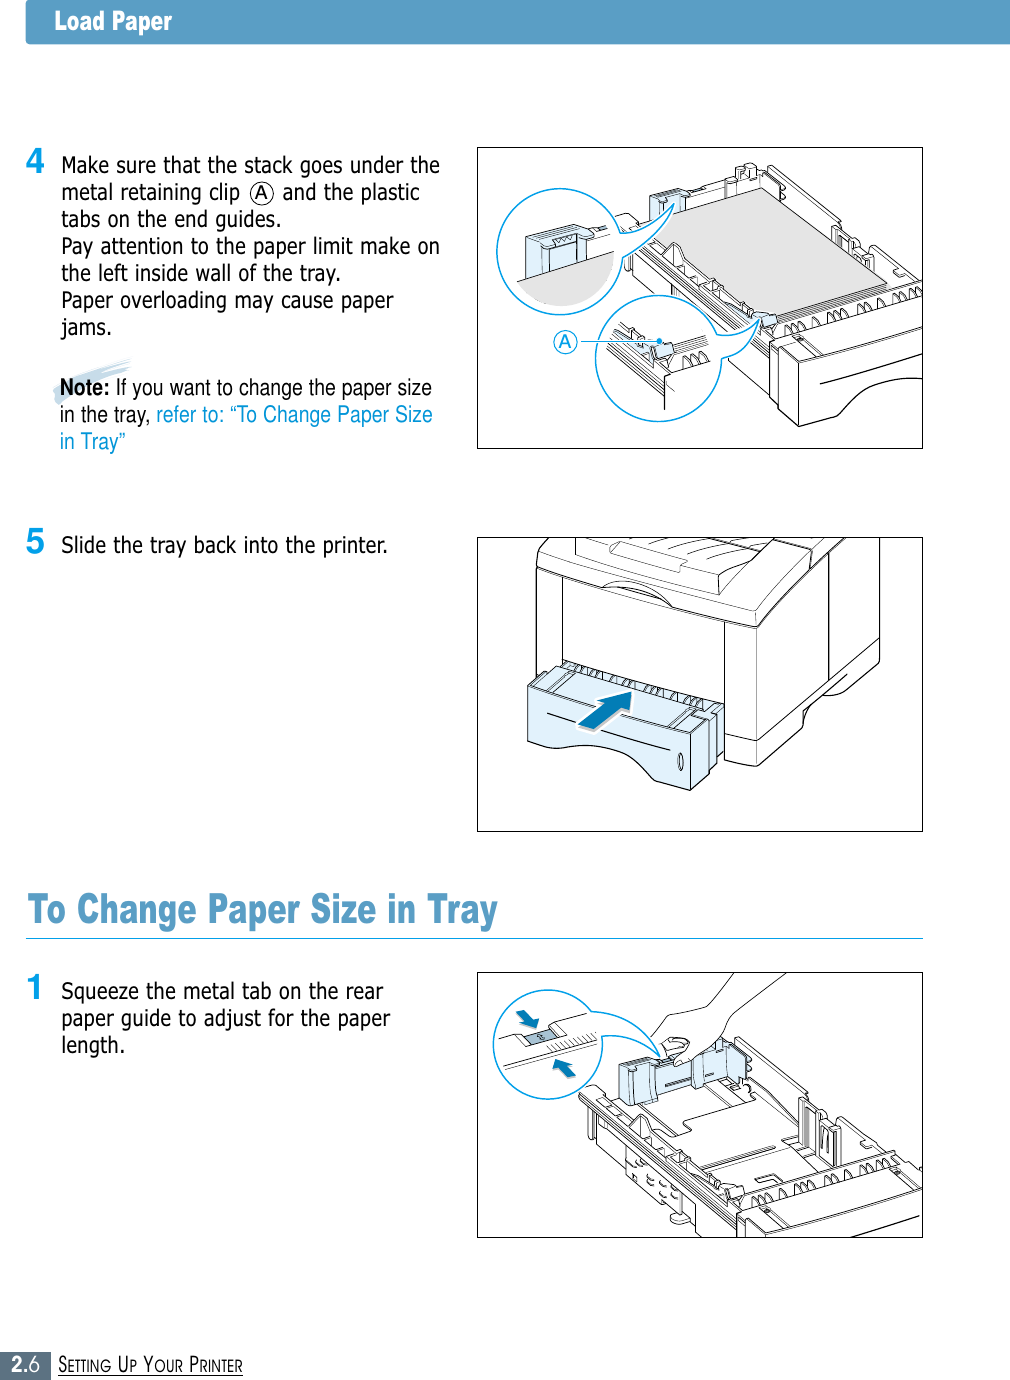 2.6SETTING UP YOUR PRINTER5Slide the tray back into the printer.Note: If you want to change the paper sizein the tray, refer to: “To Change Paper Sizein Tray”1Squeeze the metal tab on the rearpaper guide to adjust for the paperlength.To Change Paper Size in Tray4Make sure that the stack goes under themetal retaining clip      and the plastictabs on the end guides. Pay attention to the paper limit make onthe left inside wall of the tray.Paper overloading may cause paperjams.AALoad Paper